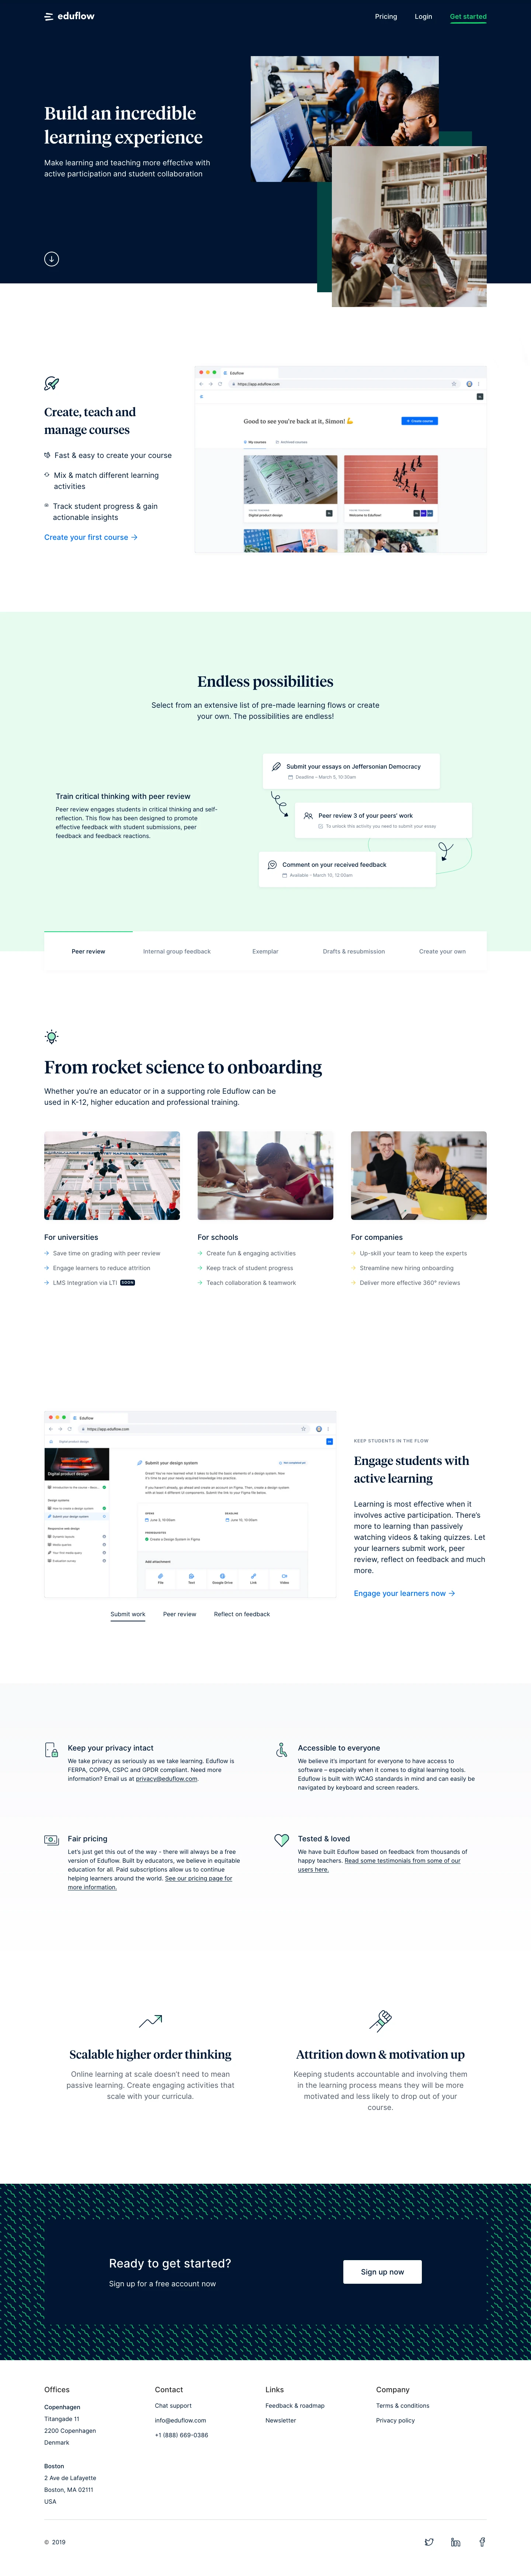 Eduflow Landing Page Example: Make your learning more effective through active participation and student collaboration.